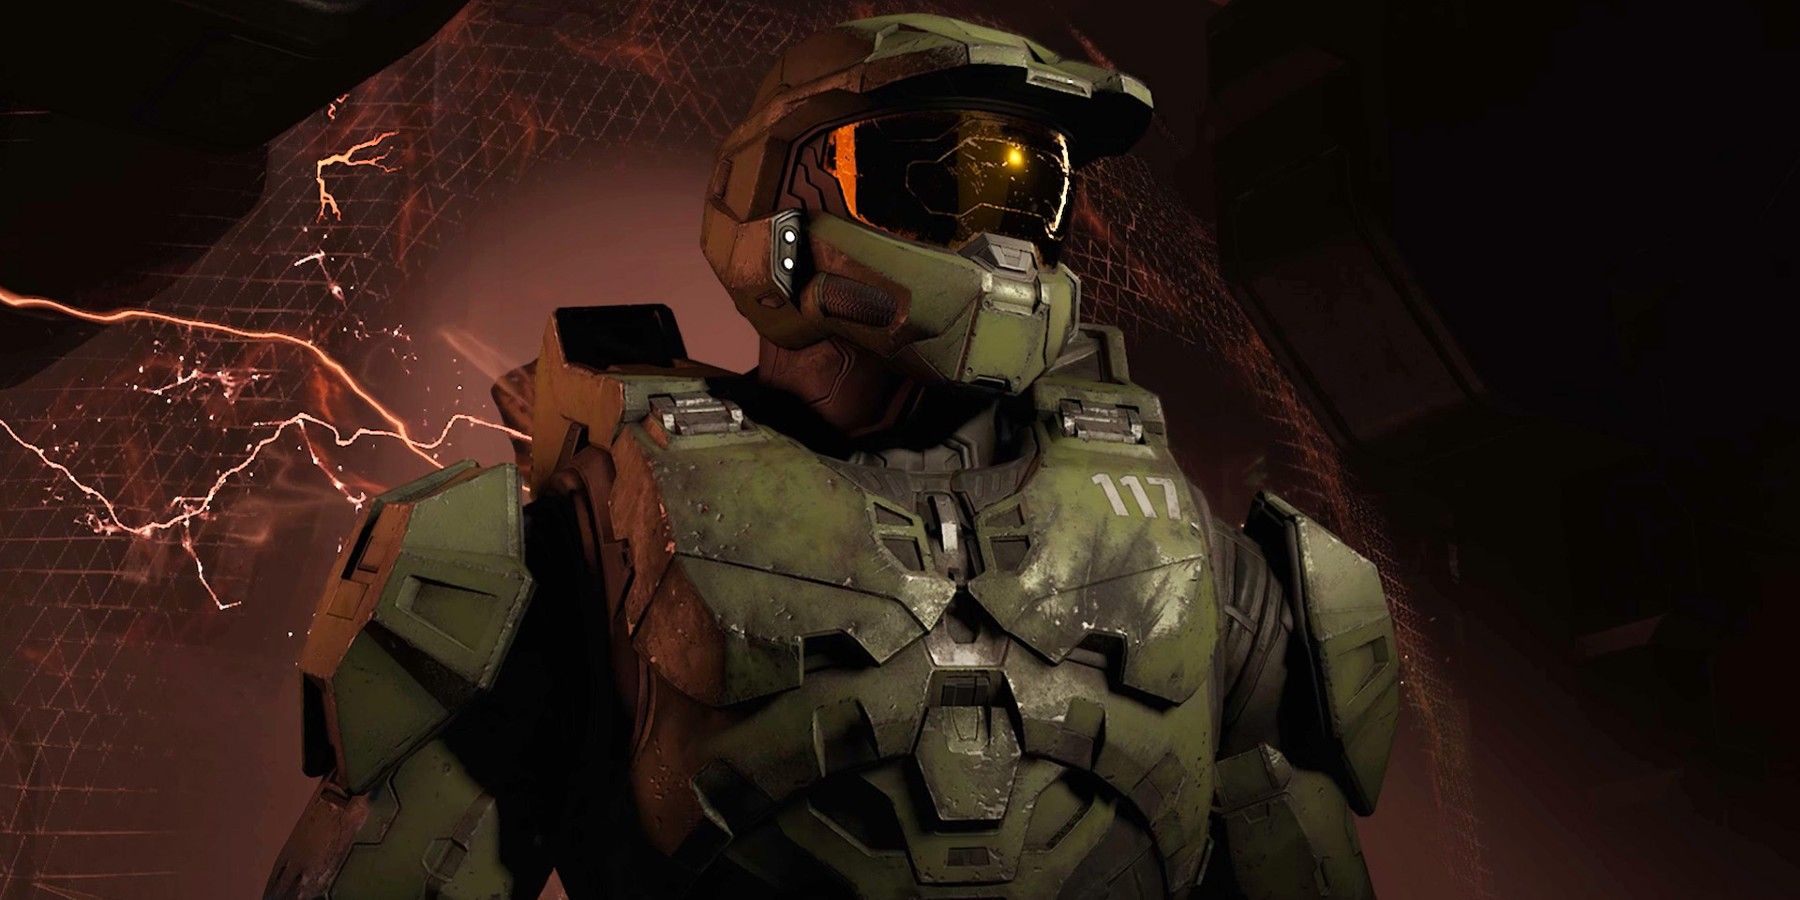 Halo Infinite Campaign Won't Let Players Replay Story Missions at Launch